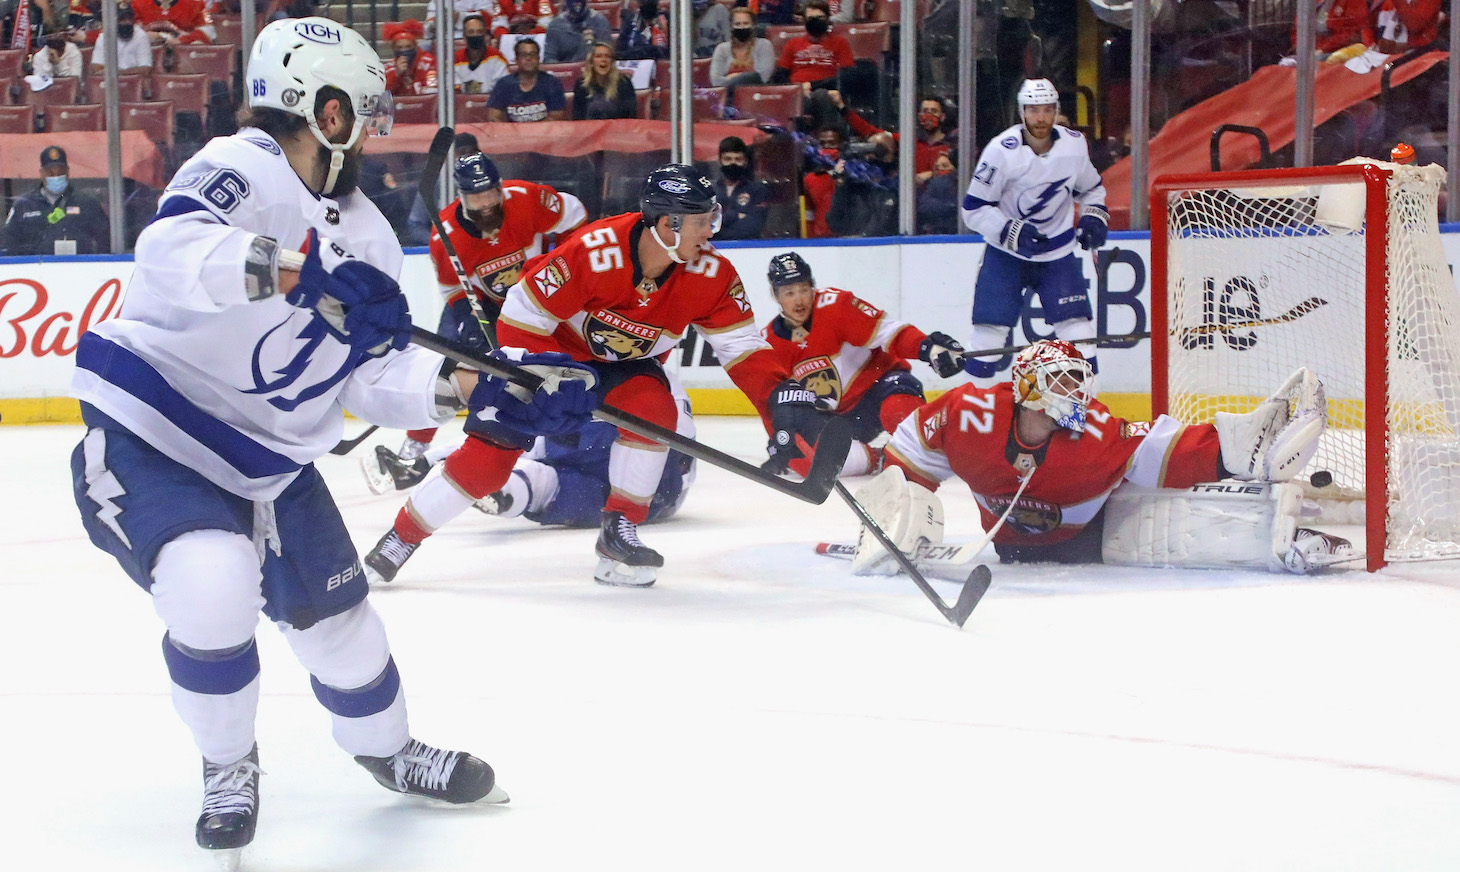 SUNRISE, FLORIDA - MAY 16: Nikita Kucherov #86 of the Tampa Bay Lightning scores on the powerplay at 14:51 of the second period against Sergei Bobrovsky #72 of the Florida Panthers in Game One of the First Round of the 2021 Stanley Cup Playoffs at the BB&amp;T Center on May 16, 2021 in Sunrise, Florida. The Lightning defeated the Panthers 5-4. (Photo by Bruce Bennett/Getty Images)